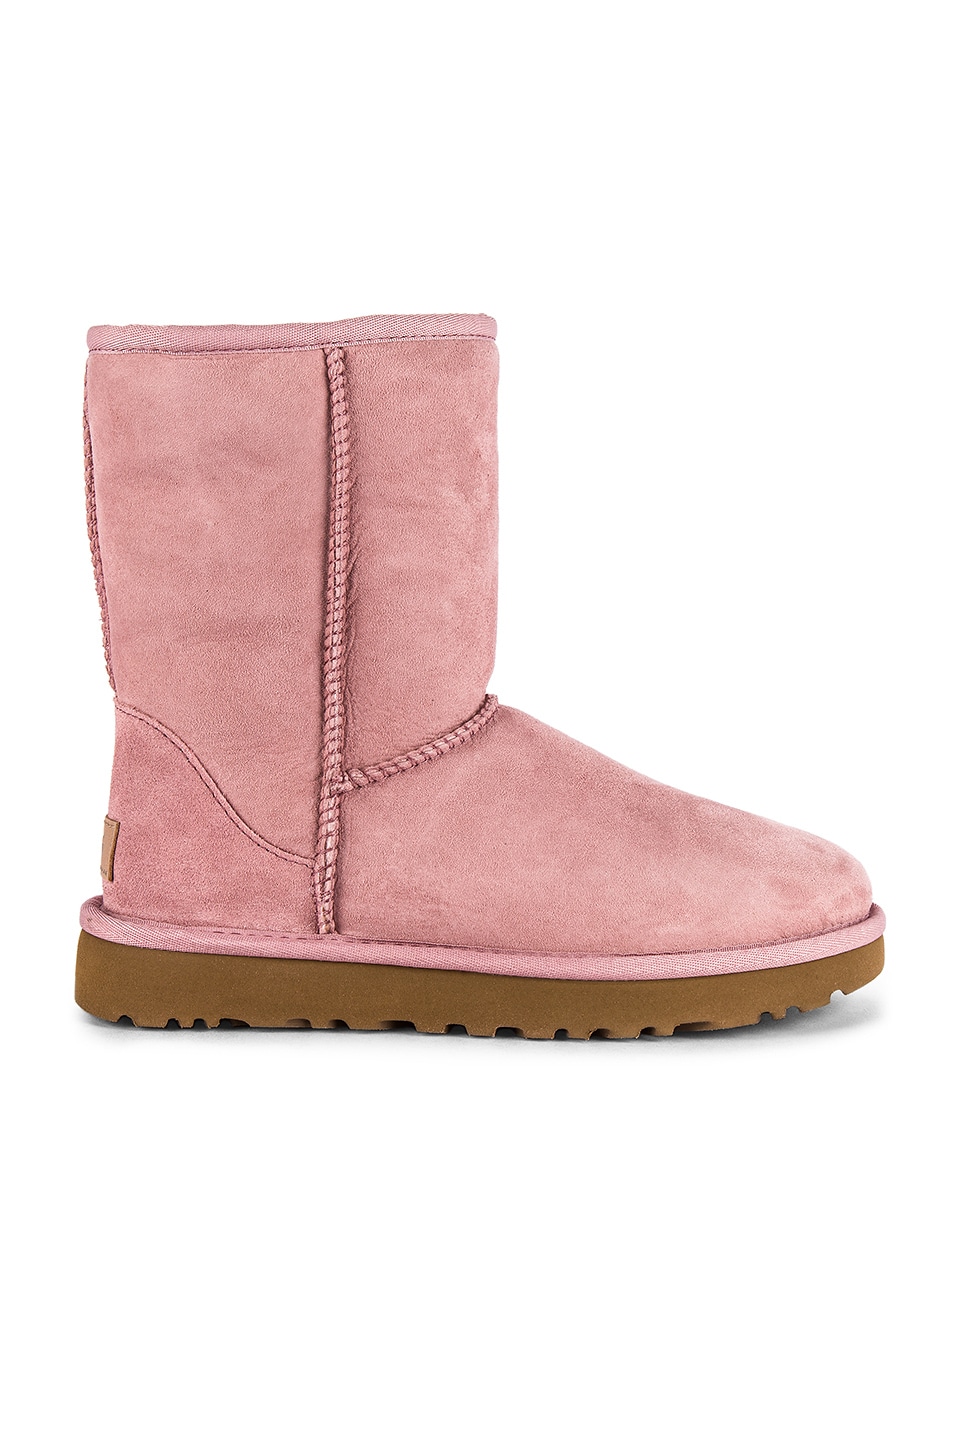 new pink uggs